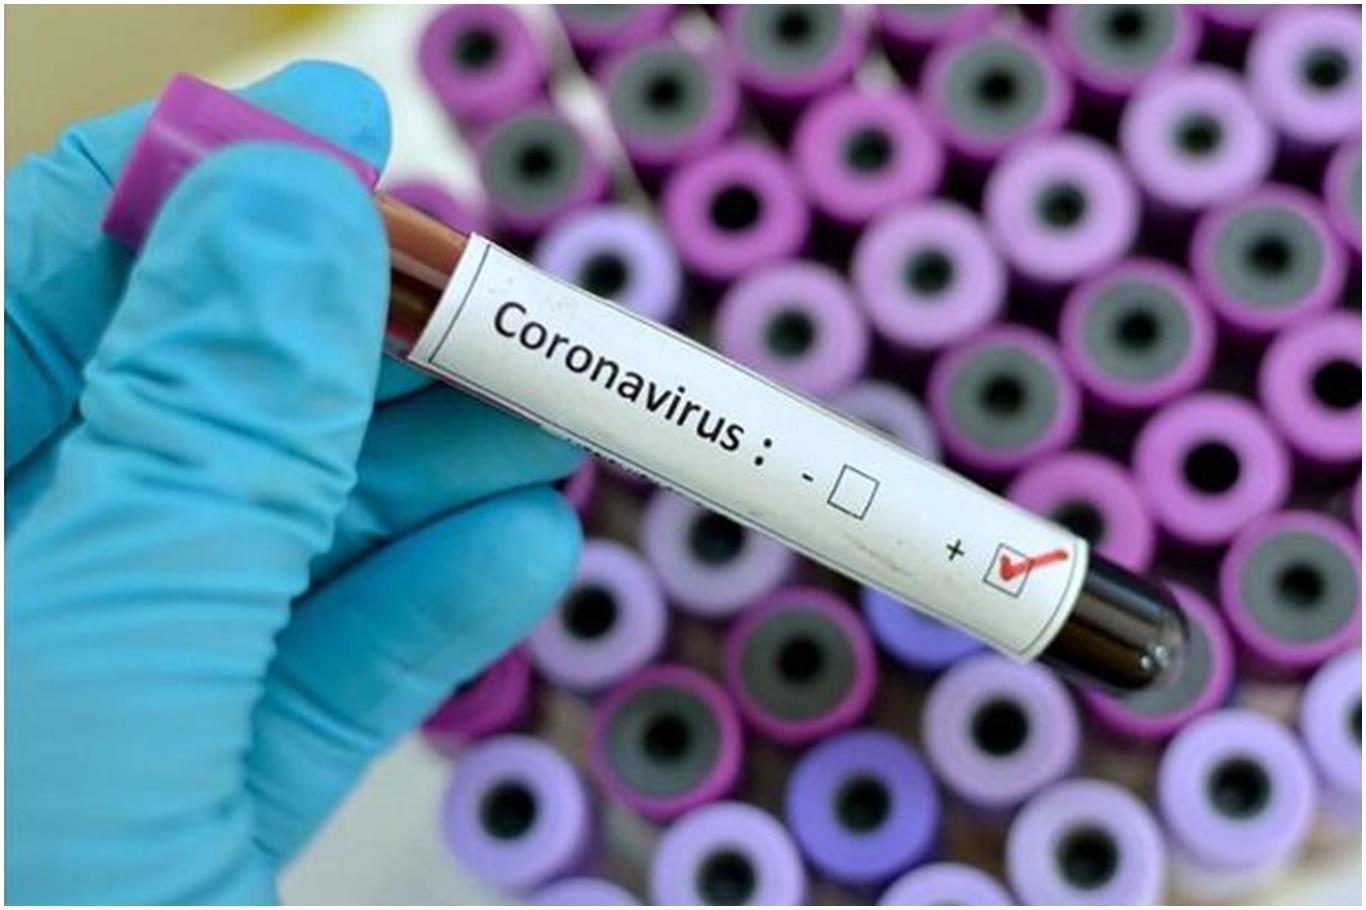 United Kingdom’s daily death toll from coronavirus drops to 118